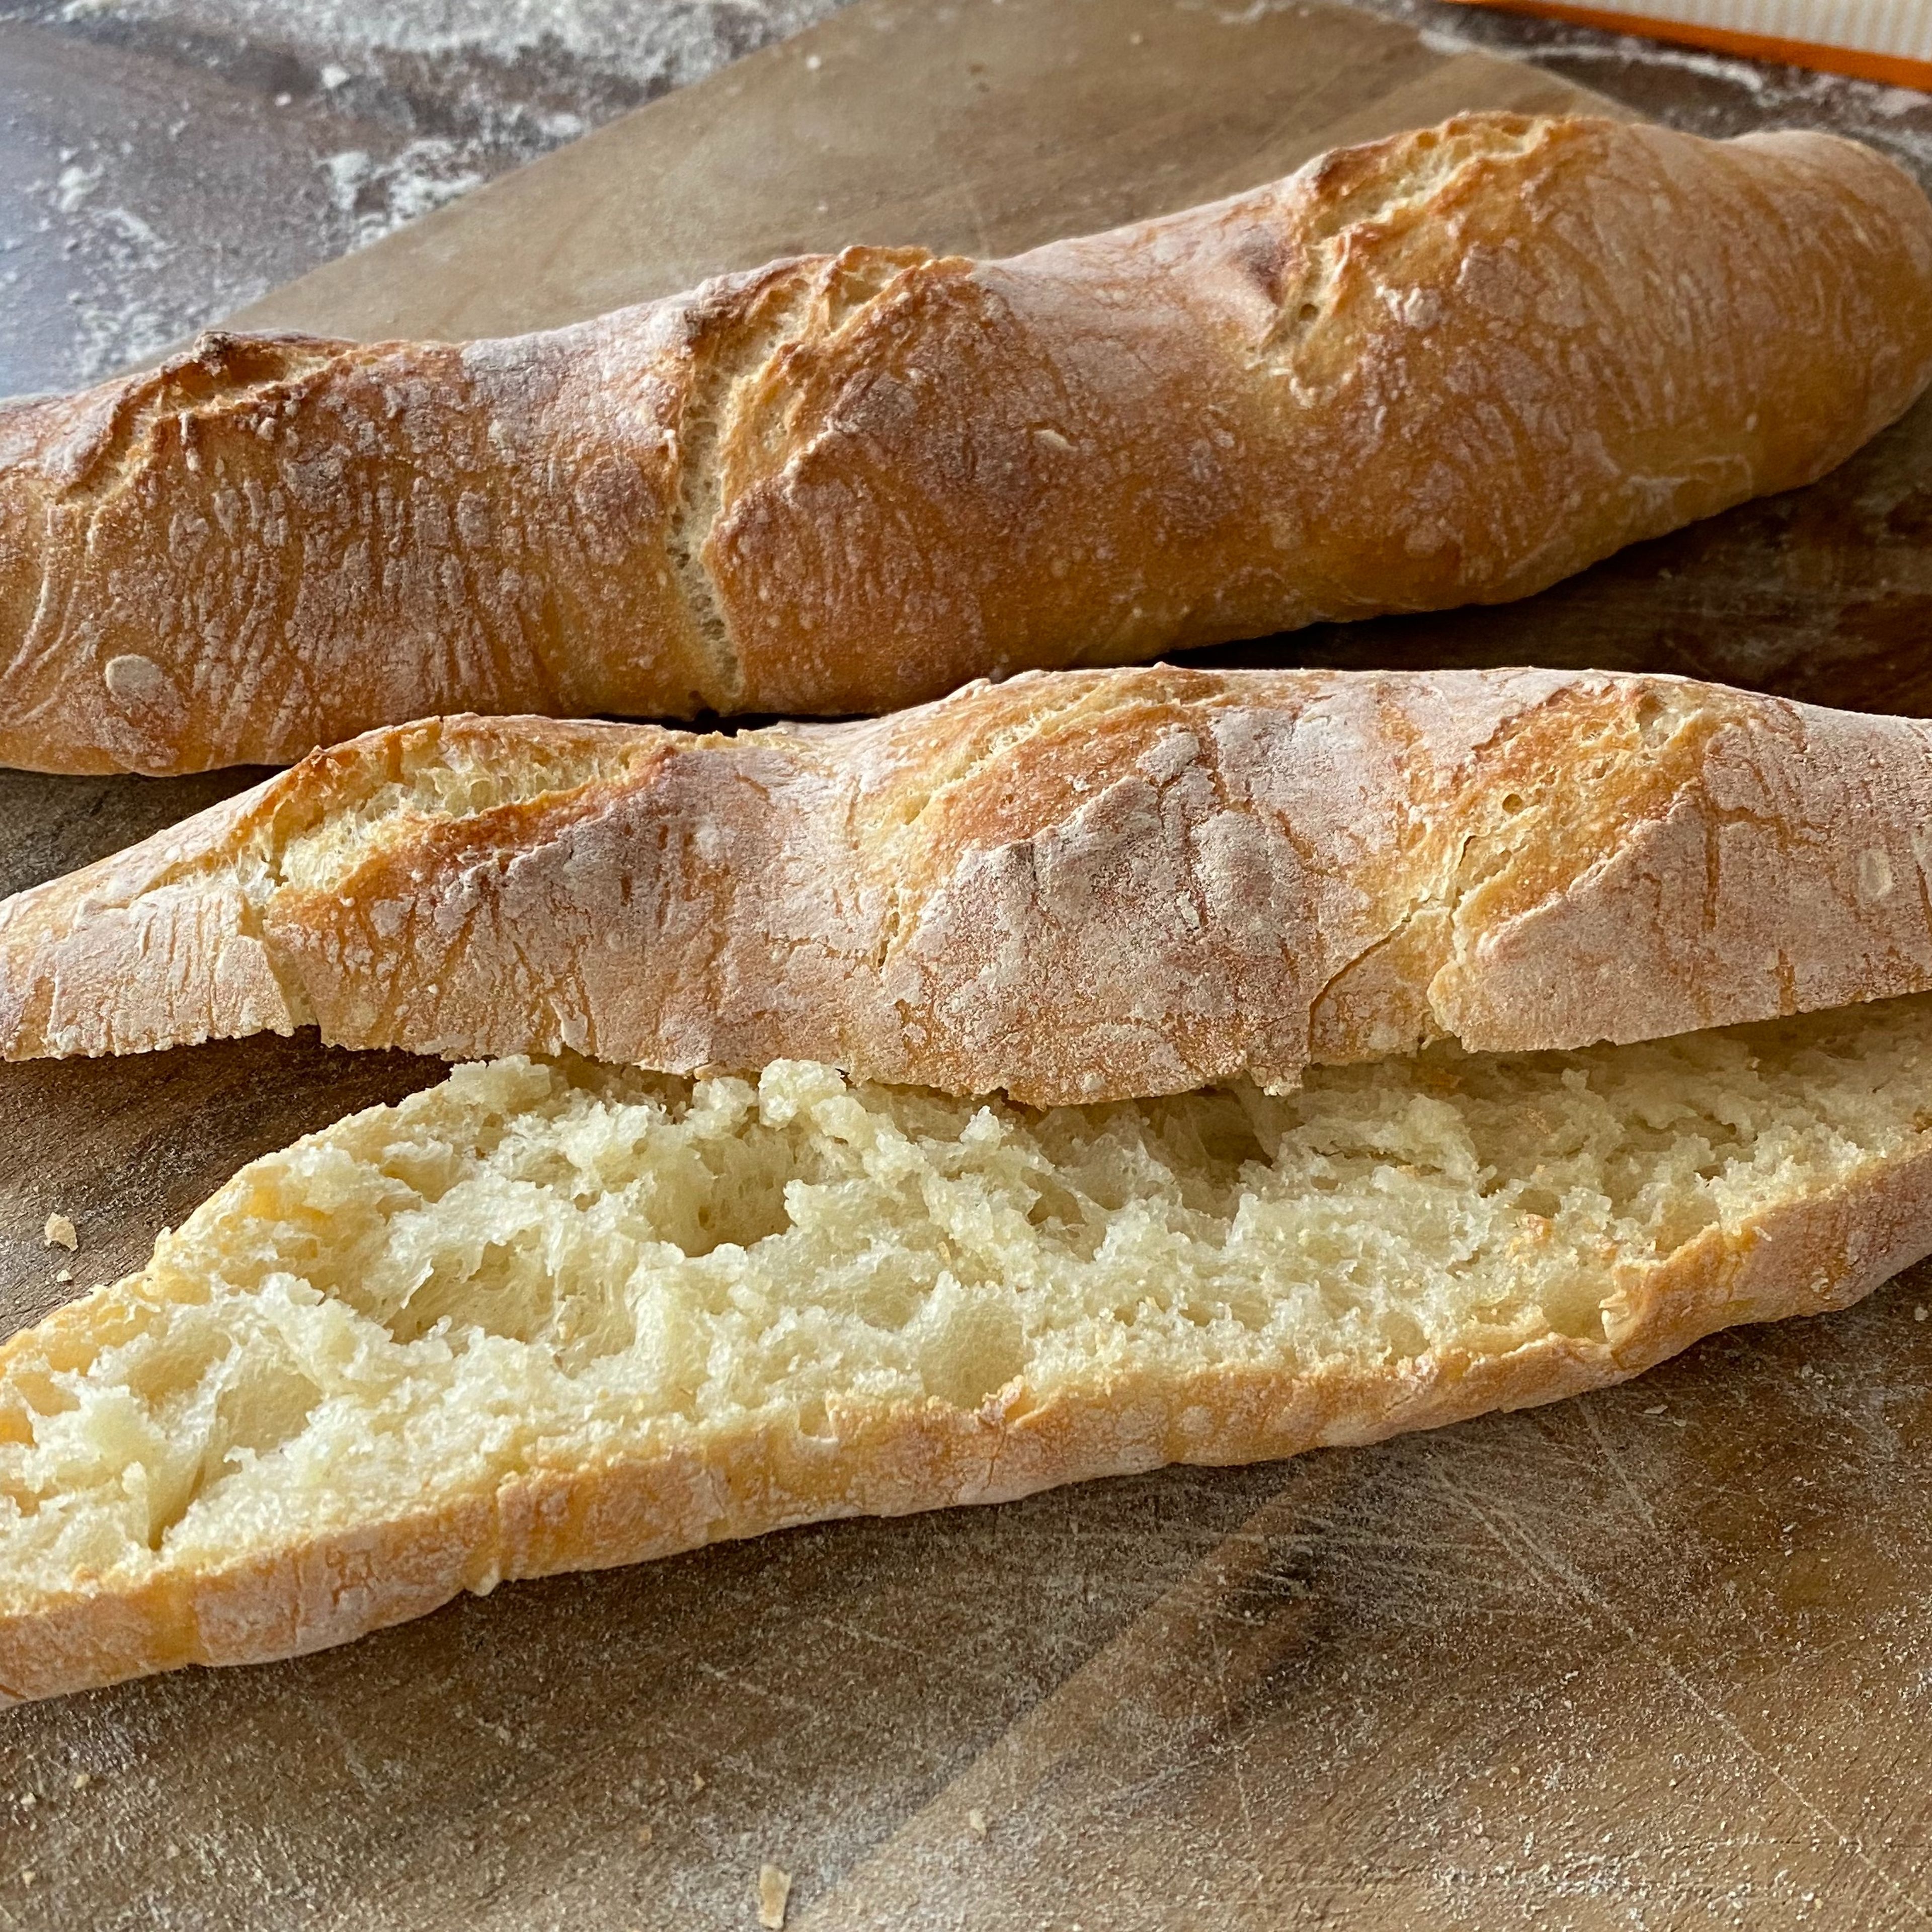 Take the baguettes out of the oven wrap in a kitchen towel let it sit for 5 minutes so the bread becomes a bit softer and easier to chew. Bon appétit